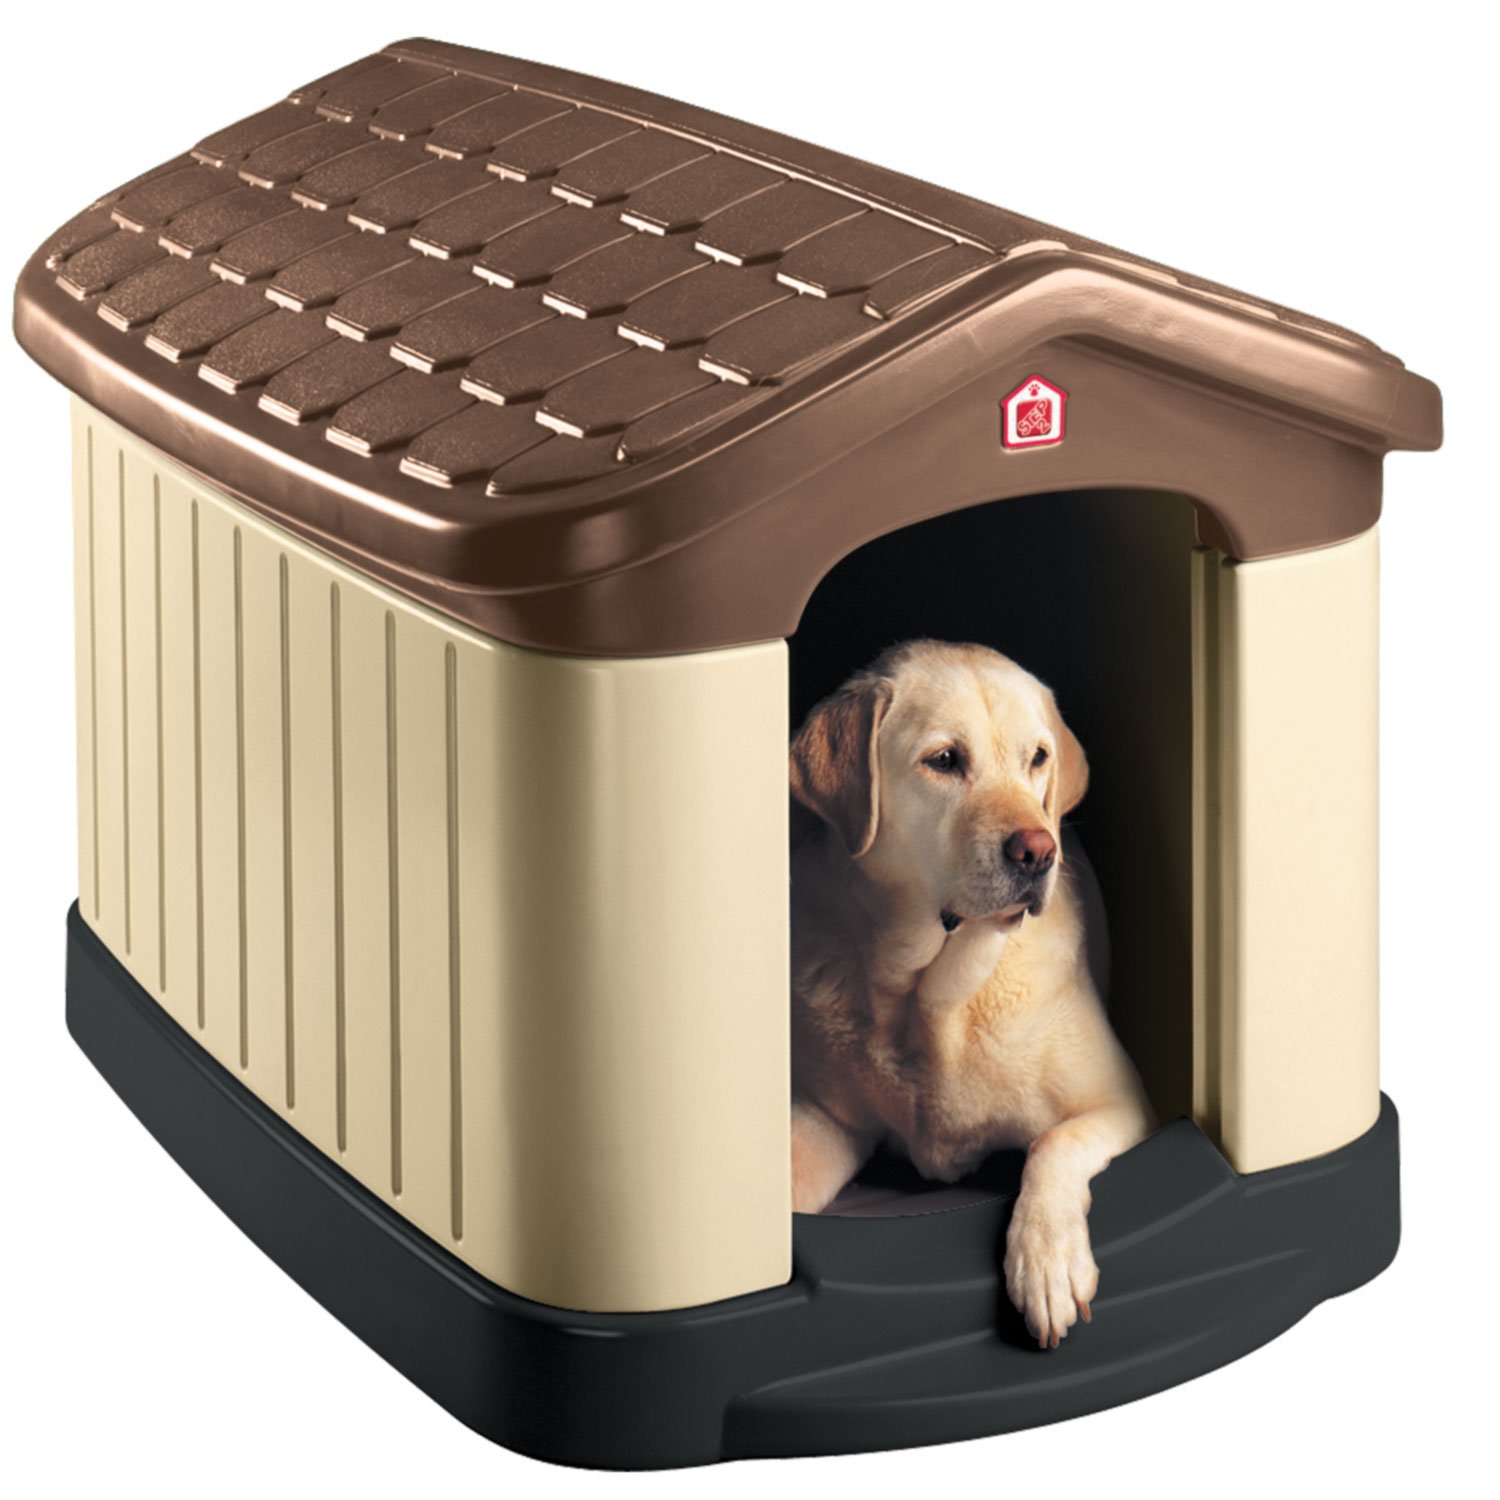 Our Pet's Tuff-N-Rugged Dog House | Petco